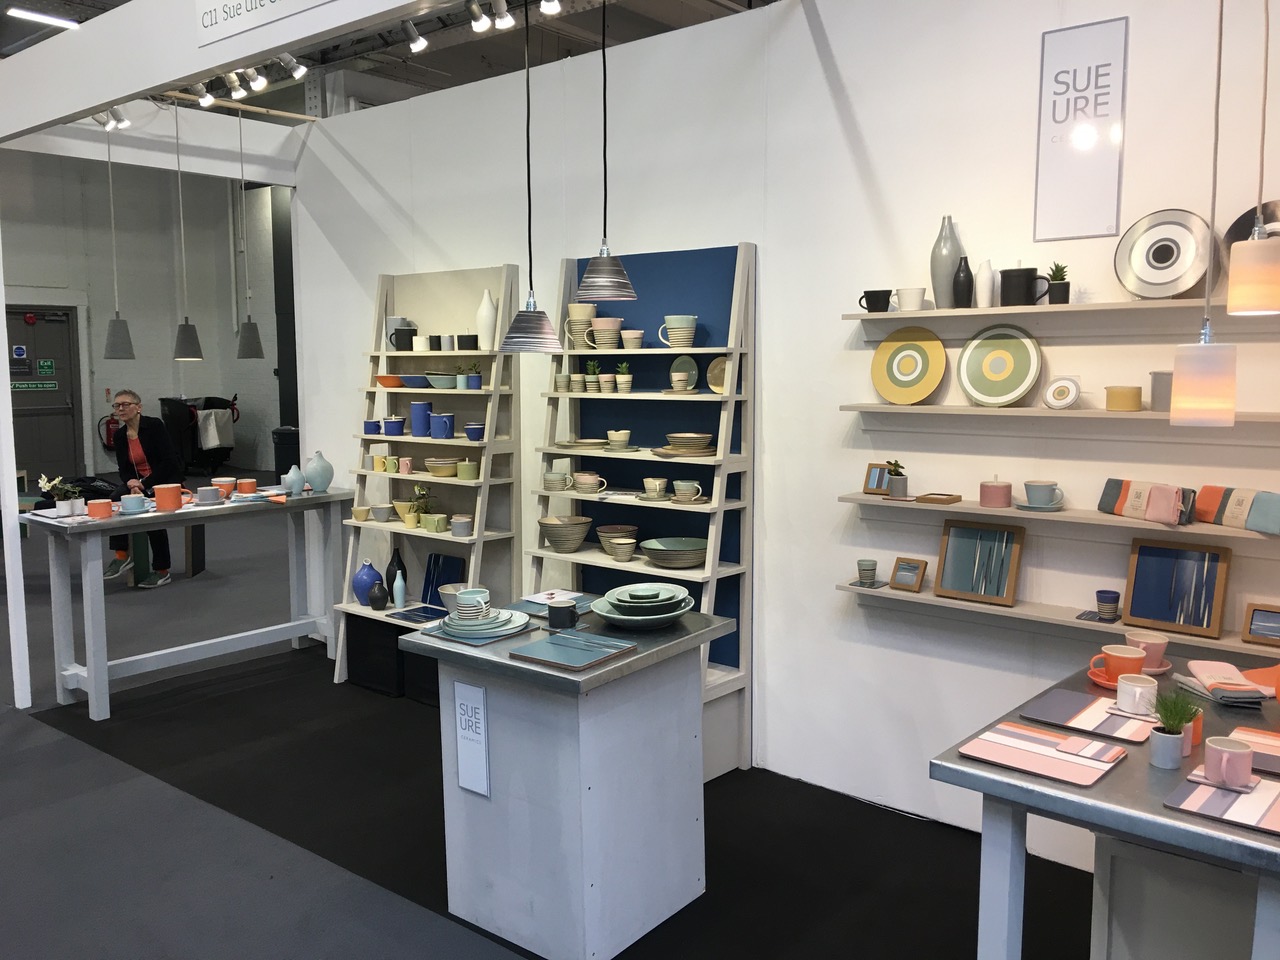 Sue Ure Ceramics stand at Top Drawer show 2020